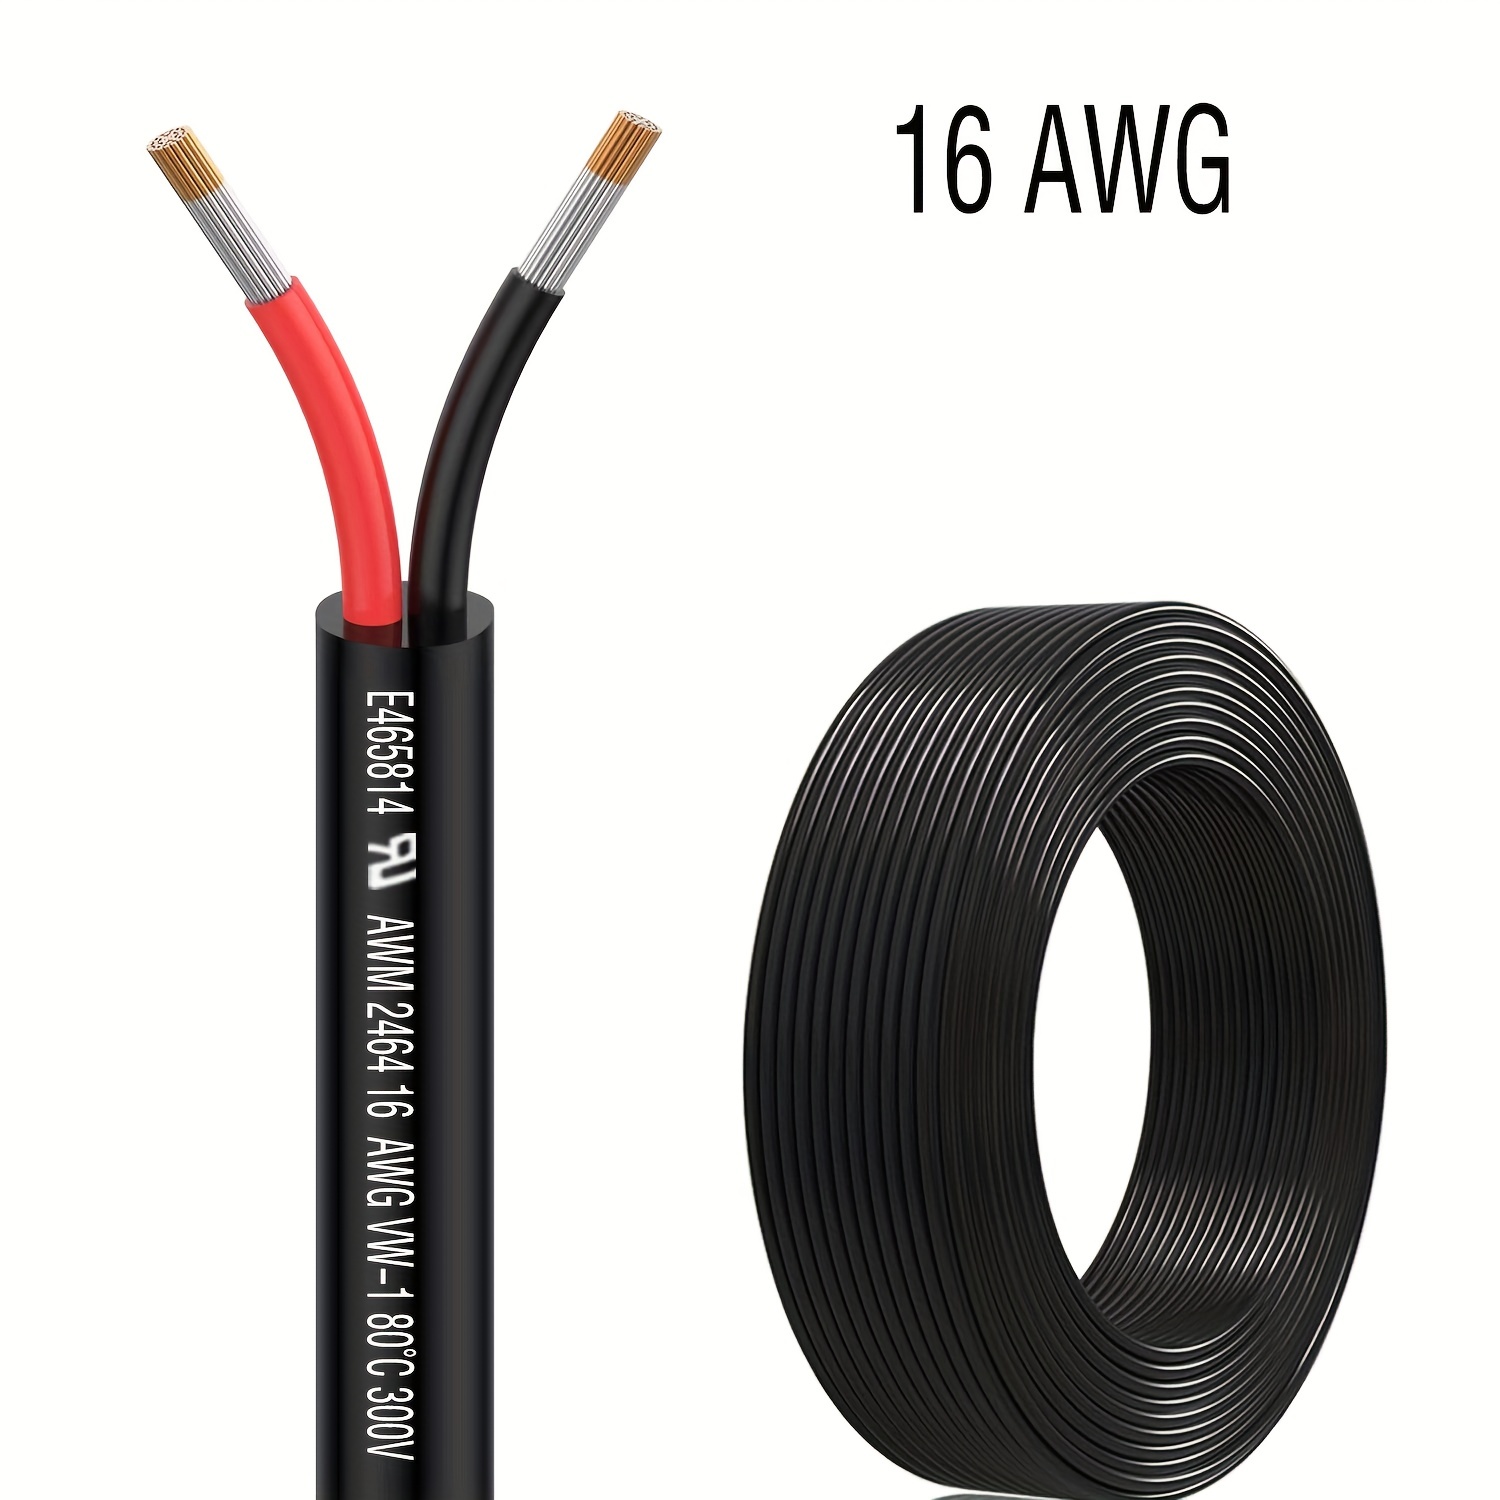 22 Gauge Silicone Electric Wire, EvZ 33ft 22AWG Flexible 2 Conductor  Parallel Cable, 2pin Red Black